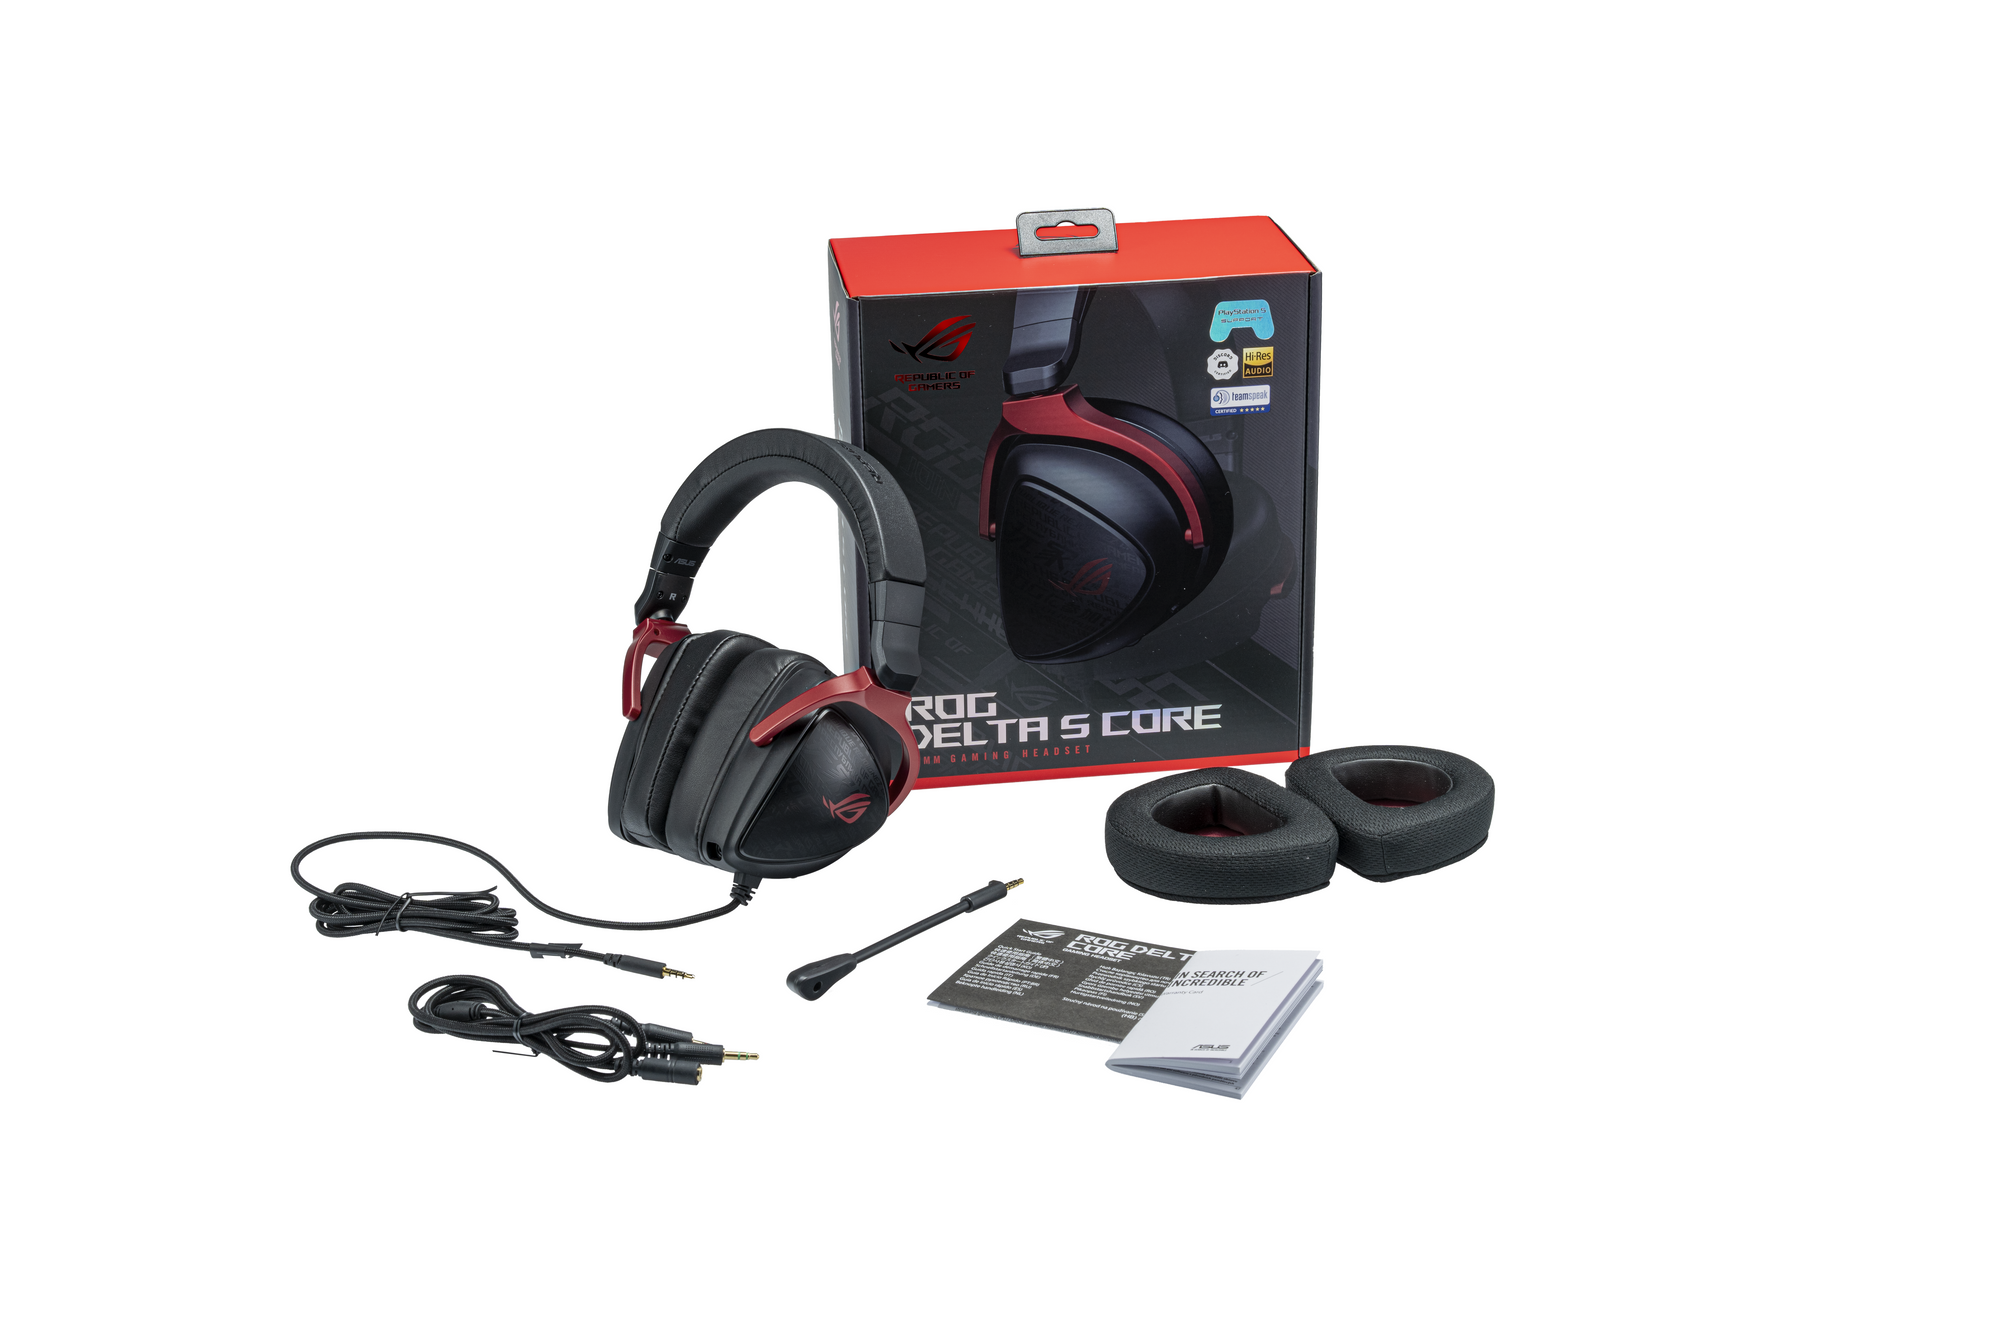 ASUS ROG Delta S Core Gaming Headset 2